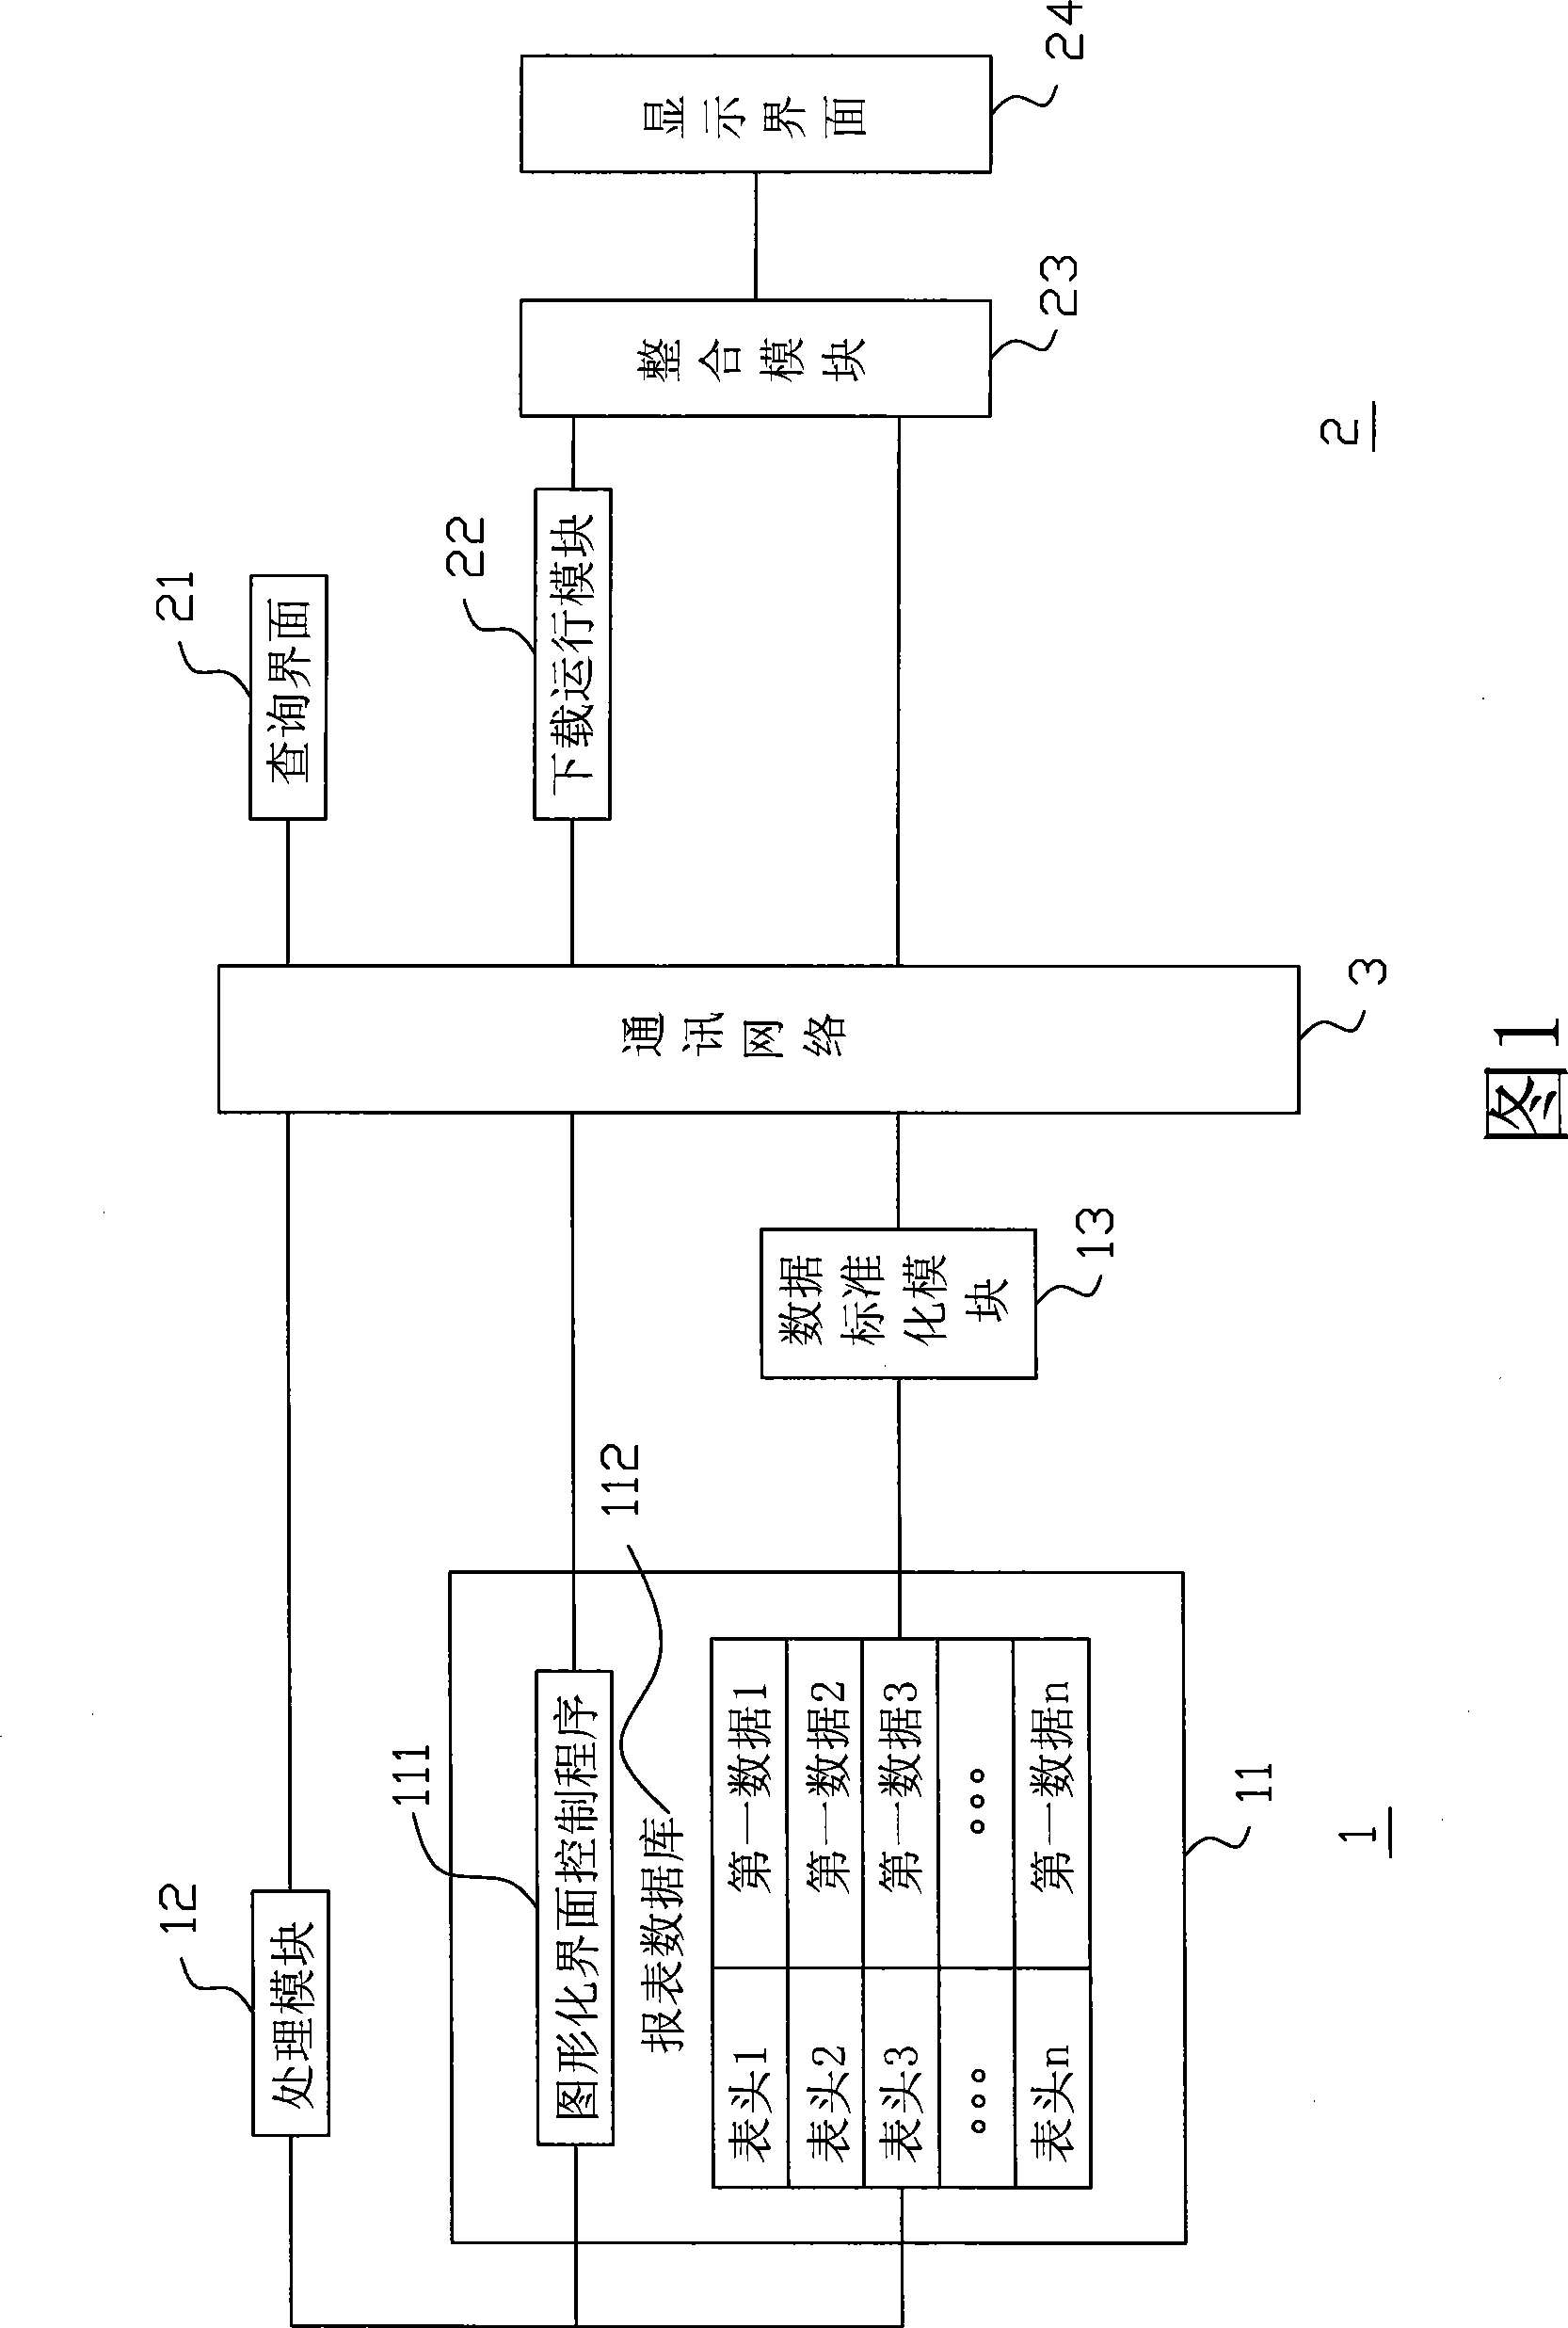 Statement enquiring system and method capable of controlling display interface